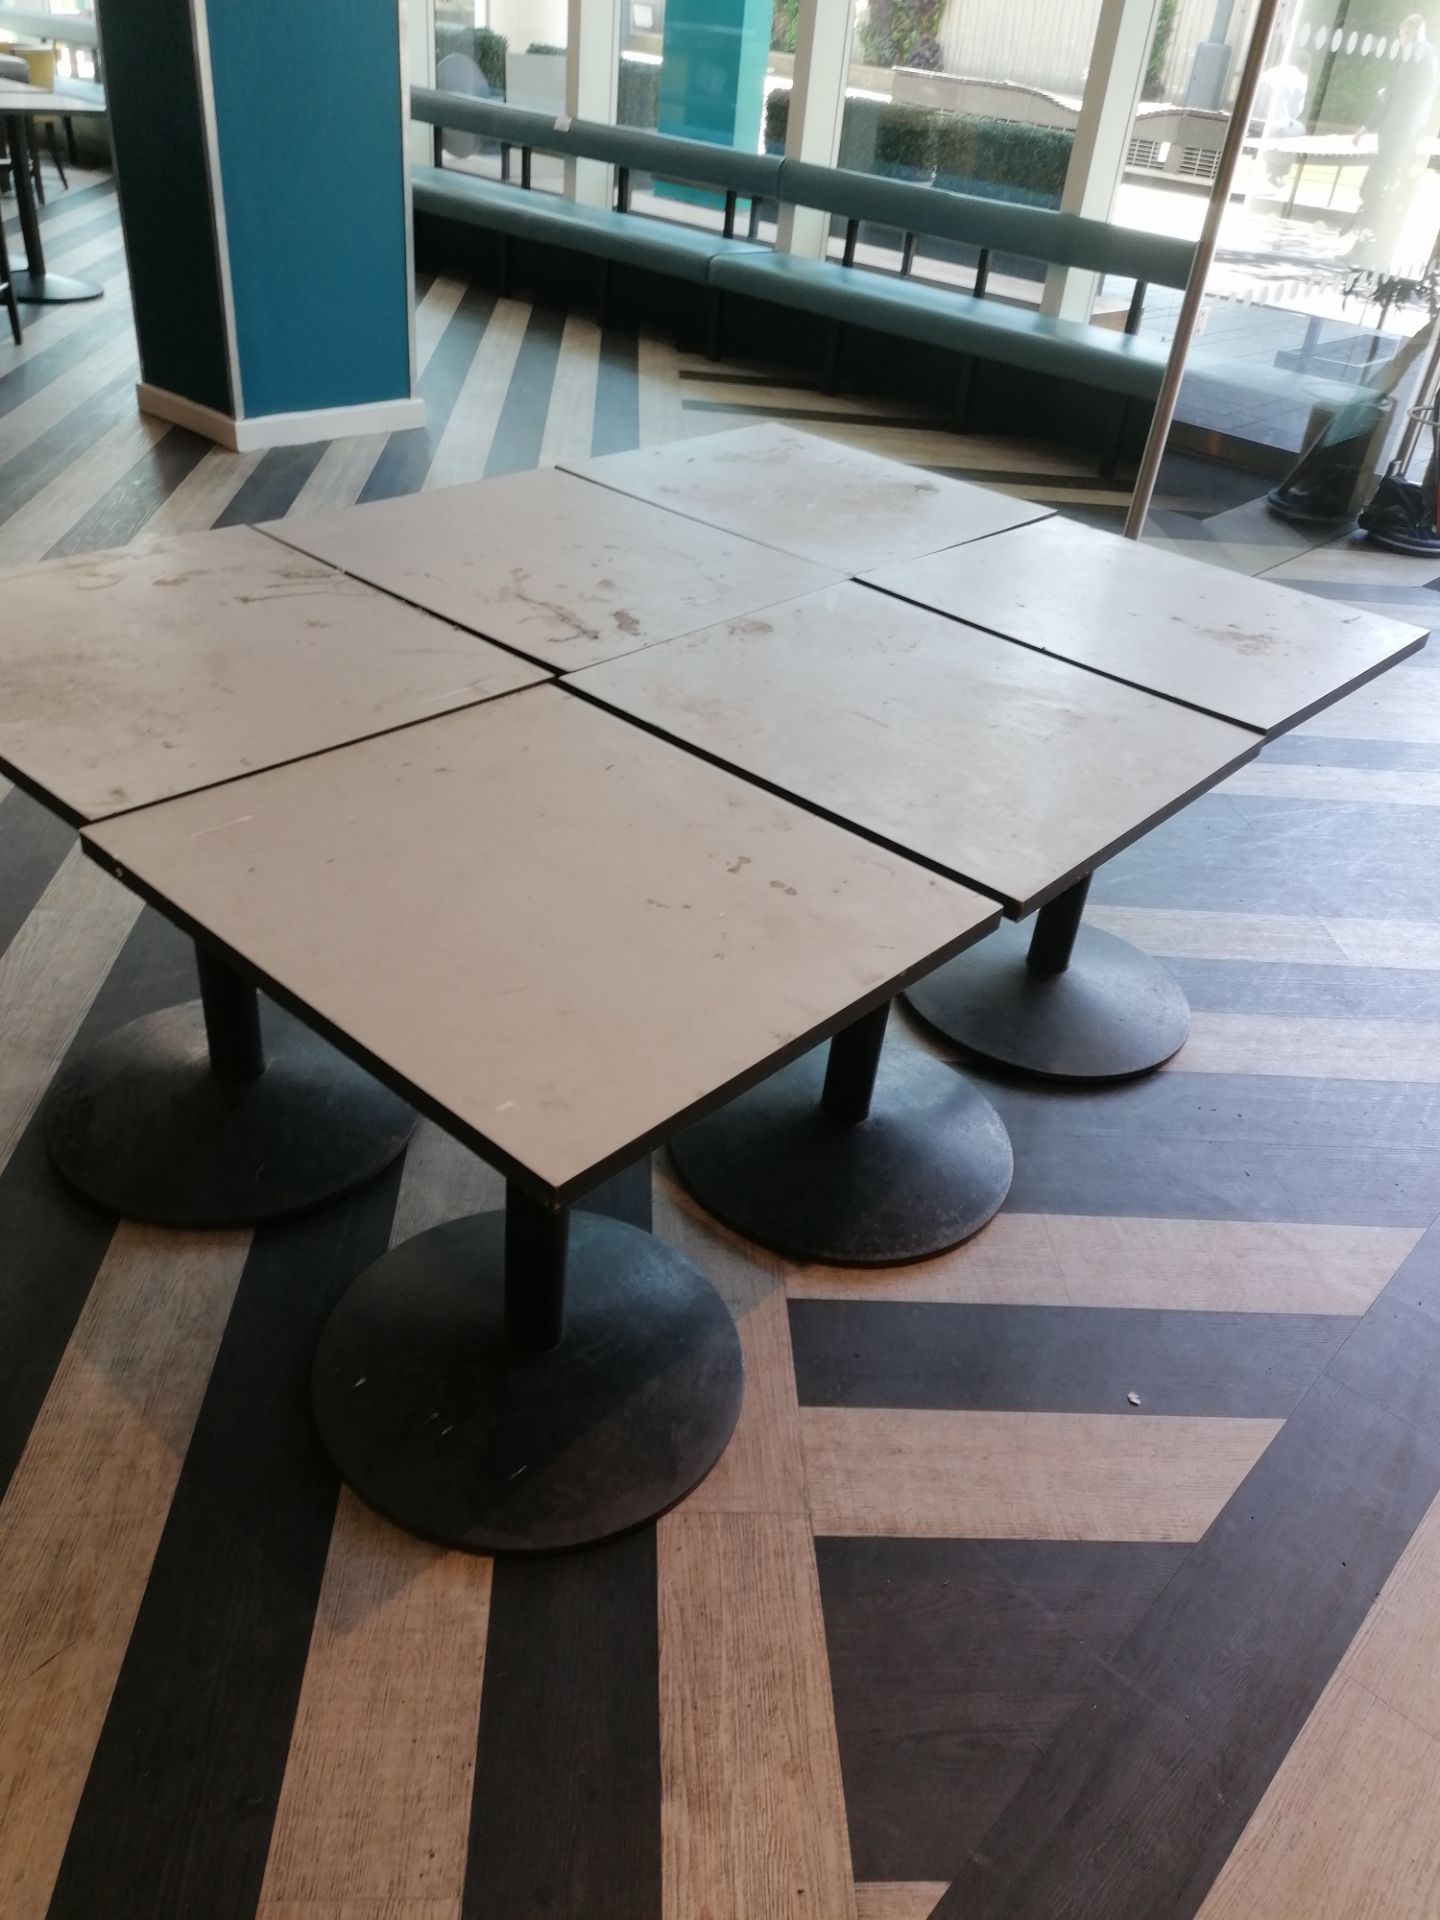 6 x Bar tables measuring (69cm x 62cm x 74cm ) wooden tops metal bases (Please Note this Lot is only